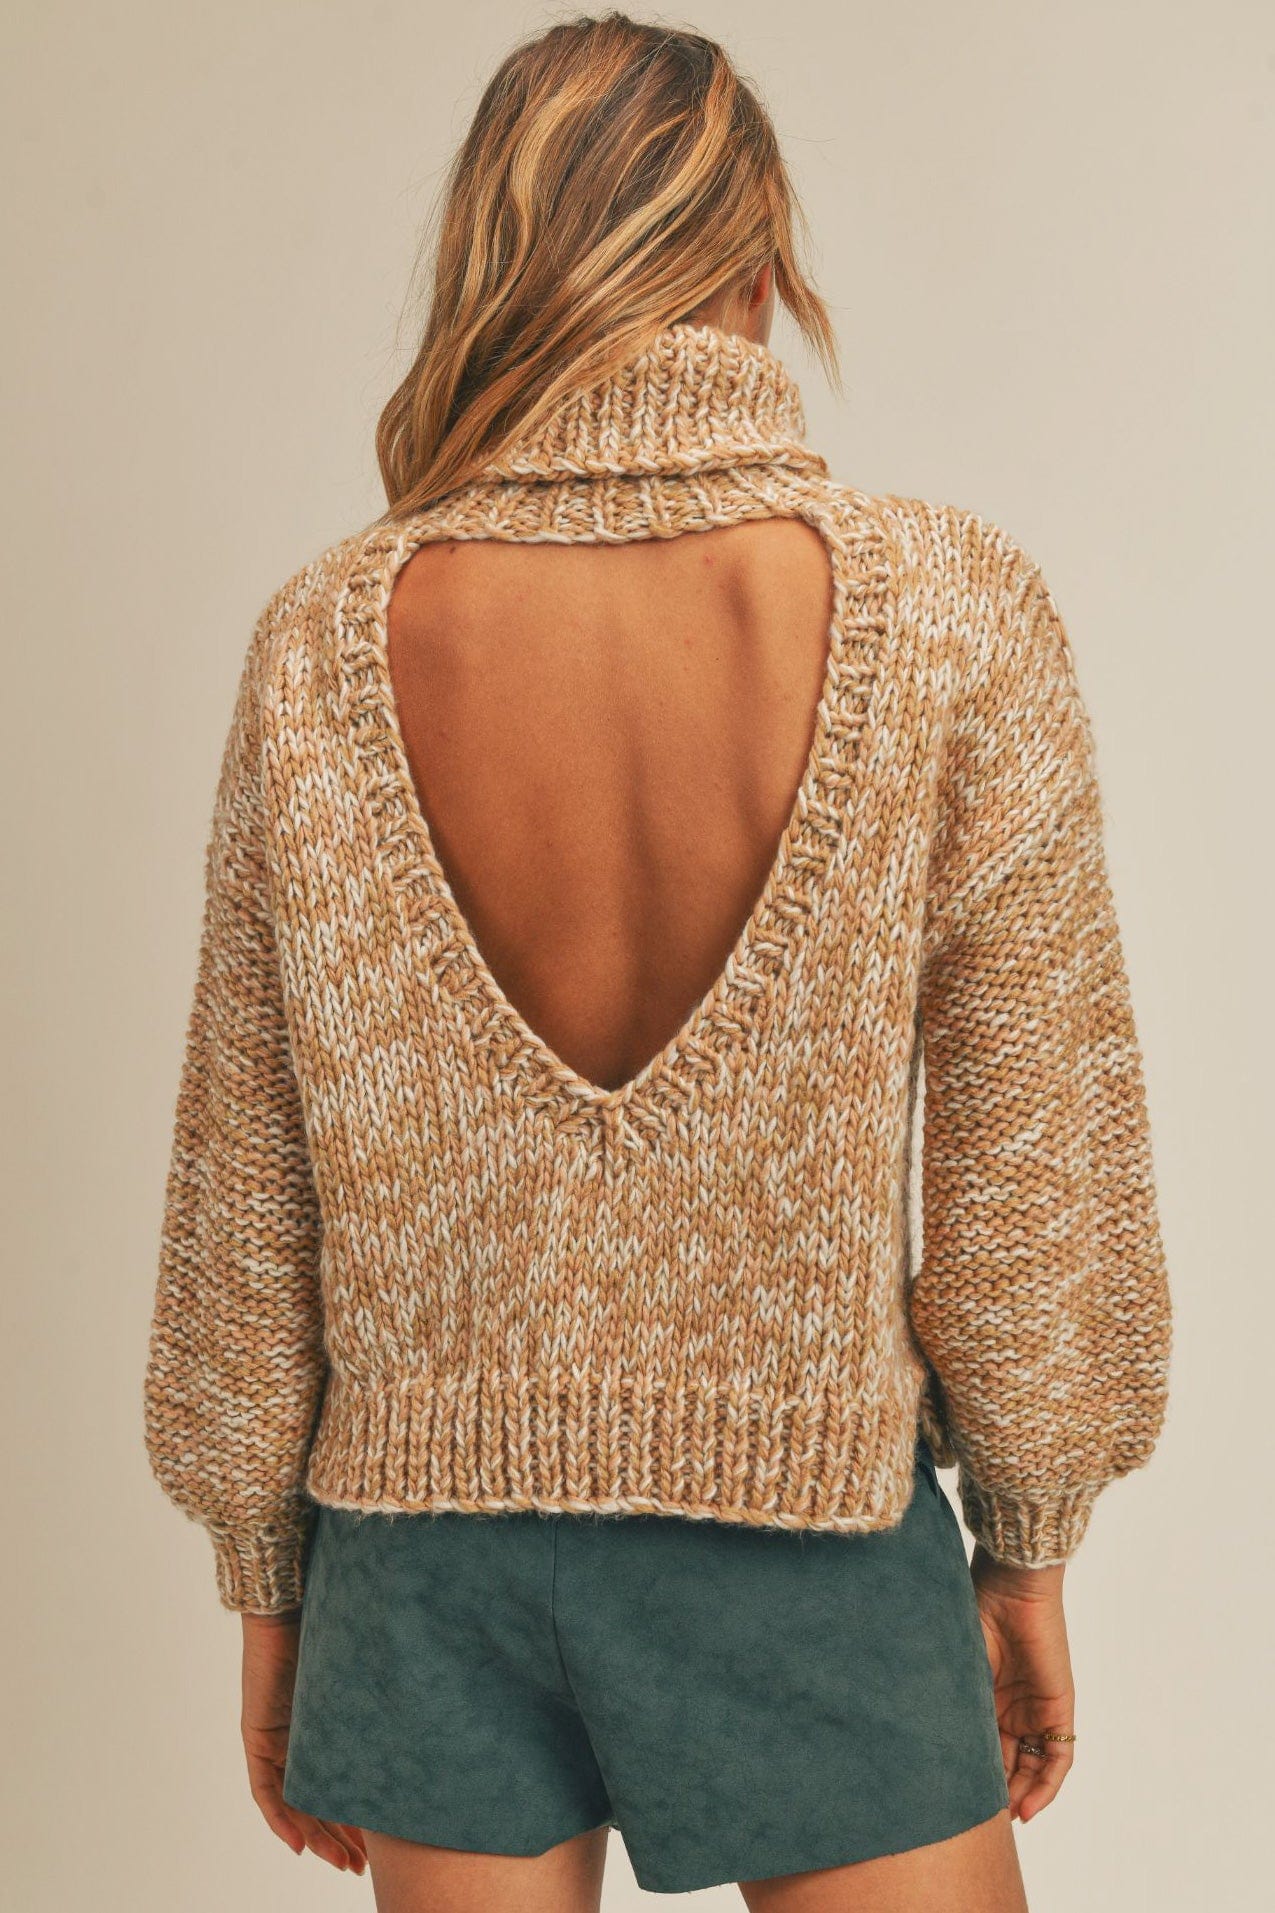 Sage The Label Hey Now Cut Out 2 Tone Chunky Knit Turtleneck Sweater - Shirts & Tops - Blooming Daily